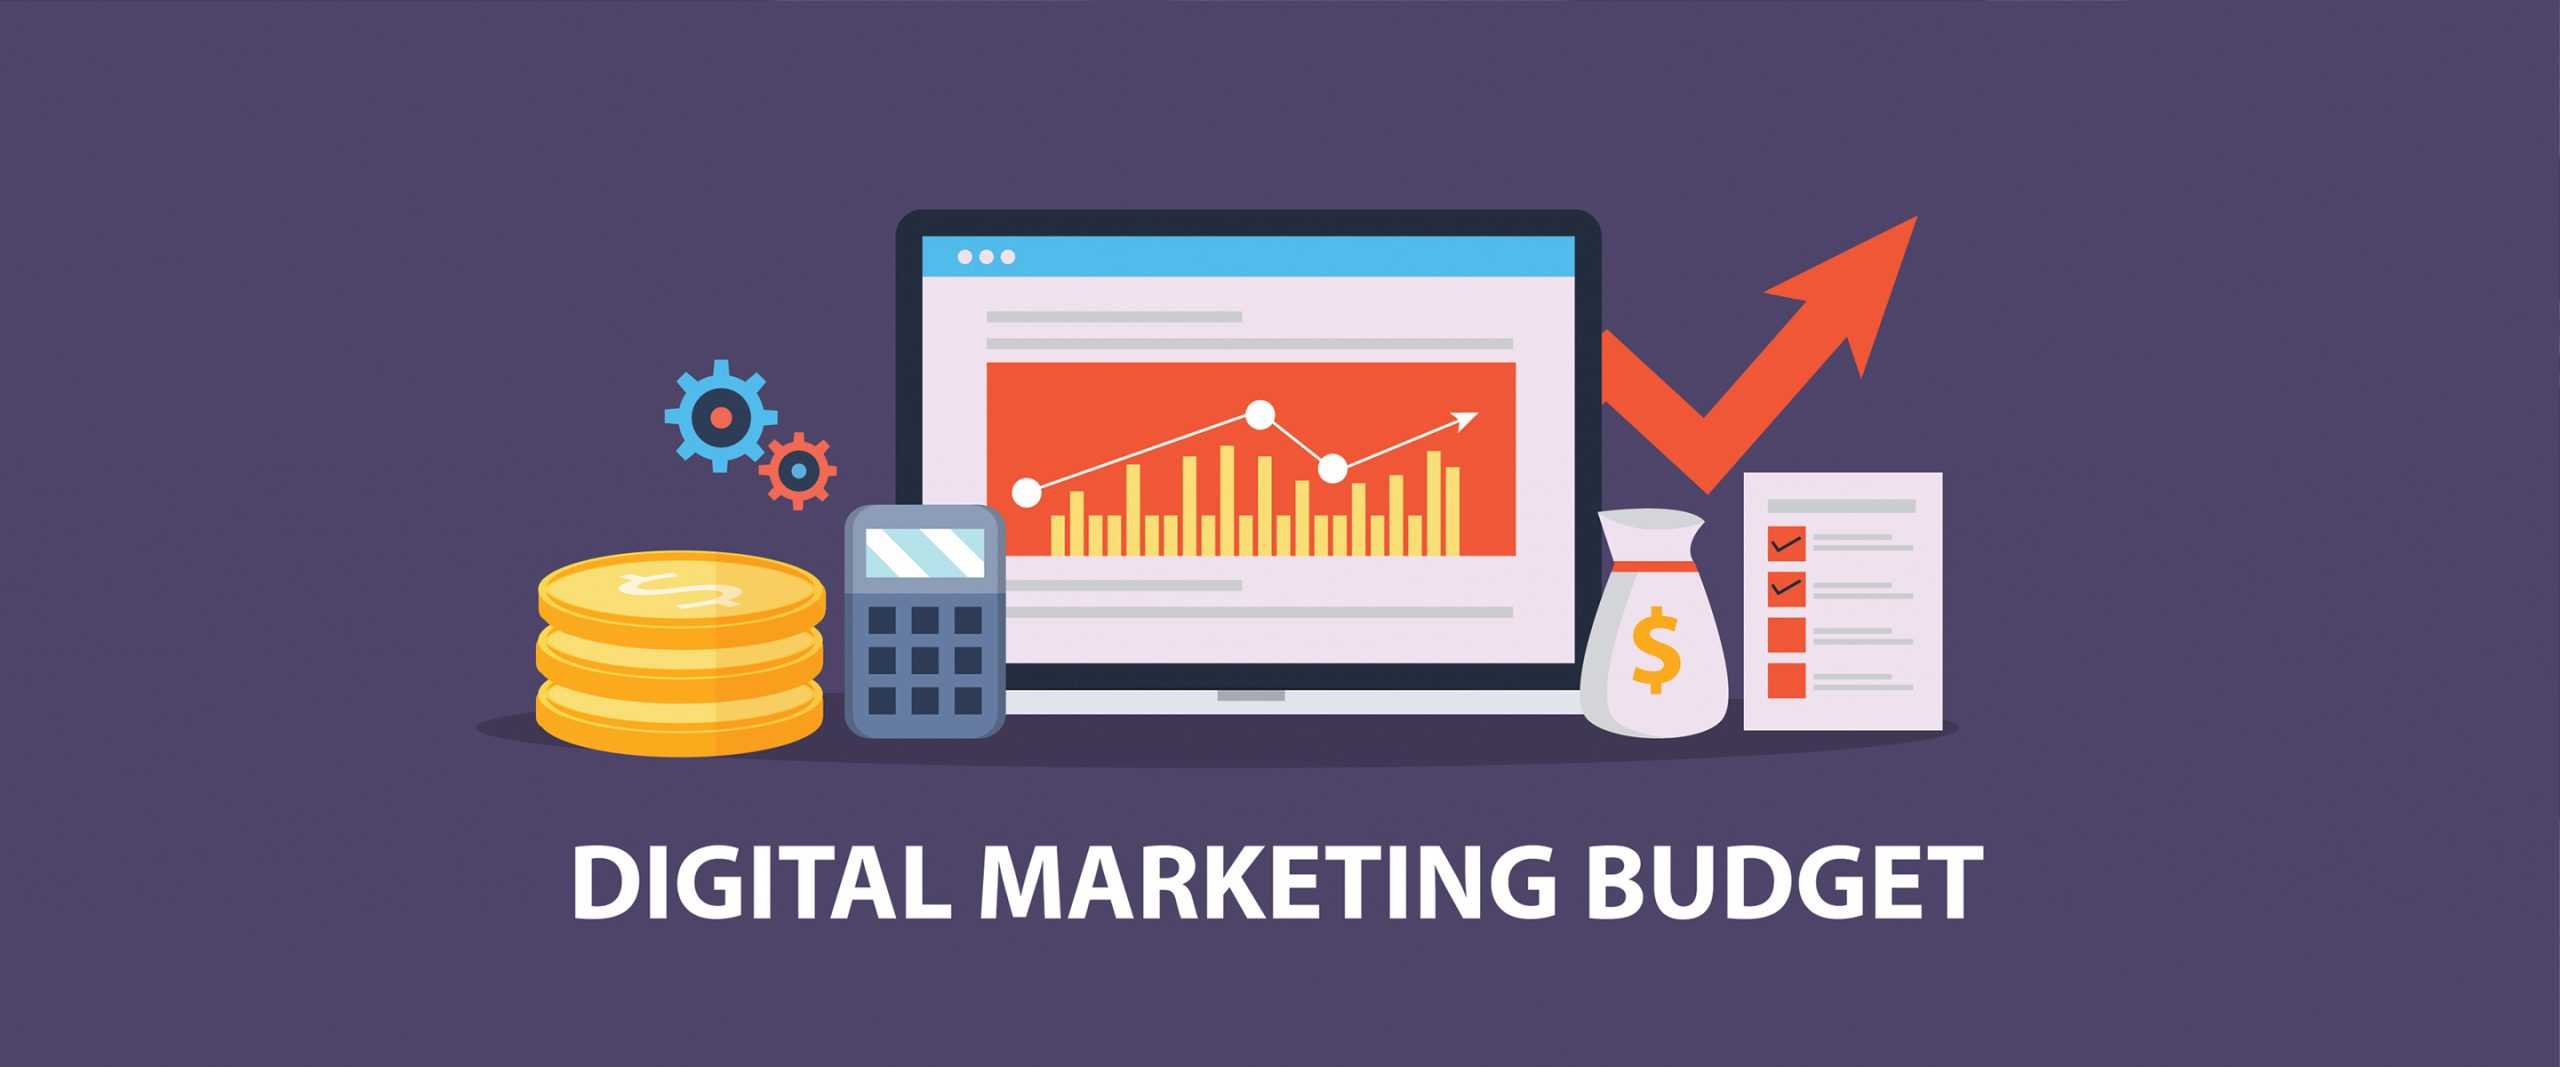 The importance of adapting your marketing budget